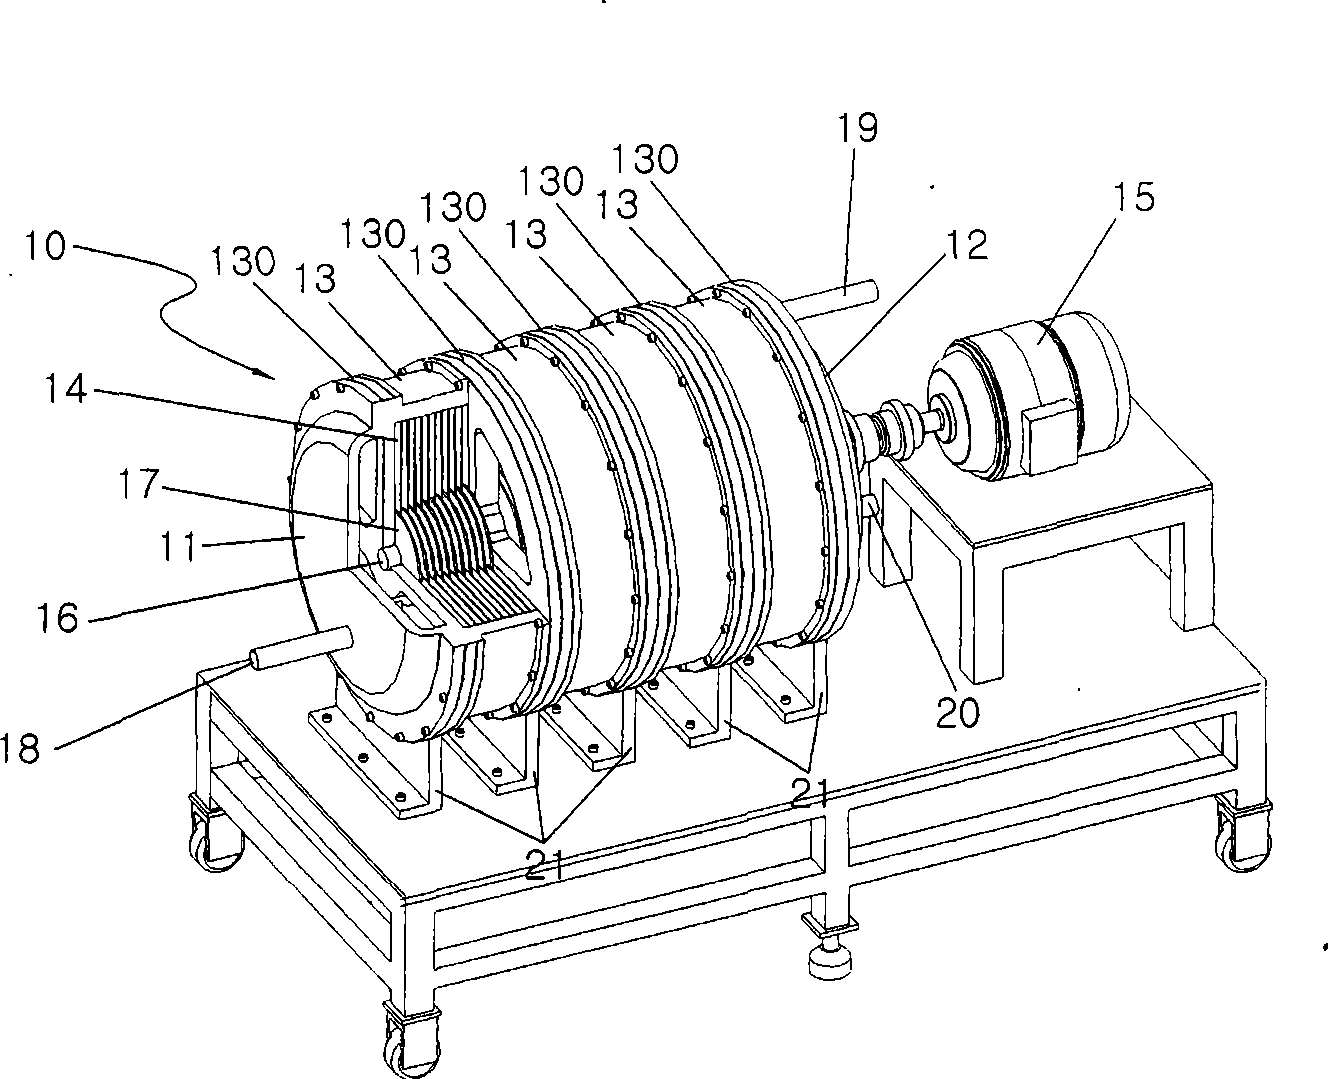 Filtering apparatus employing multistage rotor generating variable vortex flow